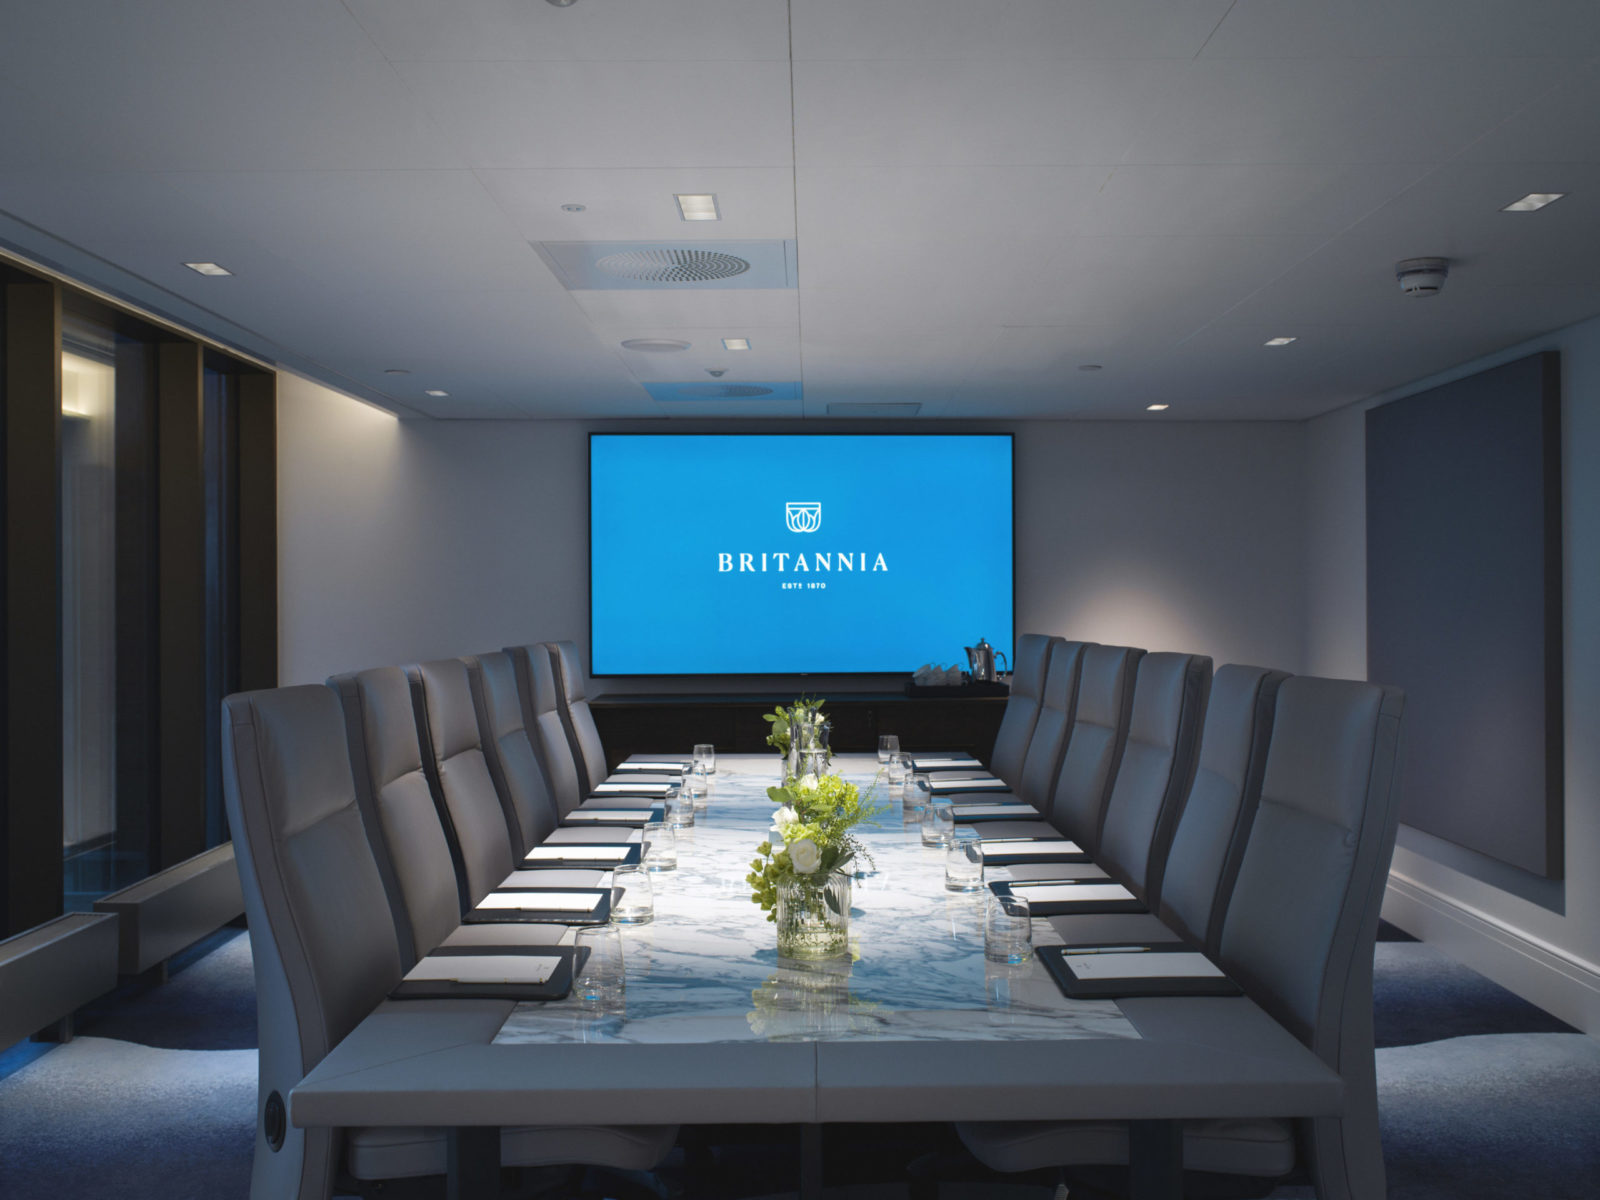 Conference room at Britannia Hotel with big screen, long table for 12 people